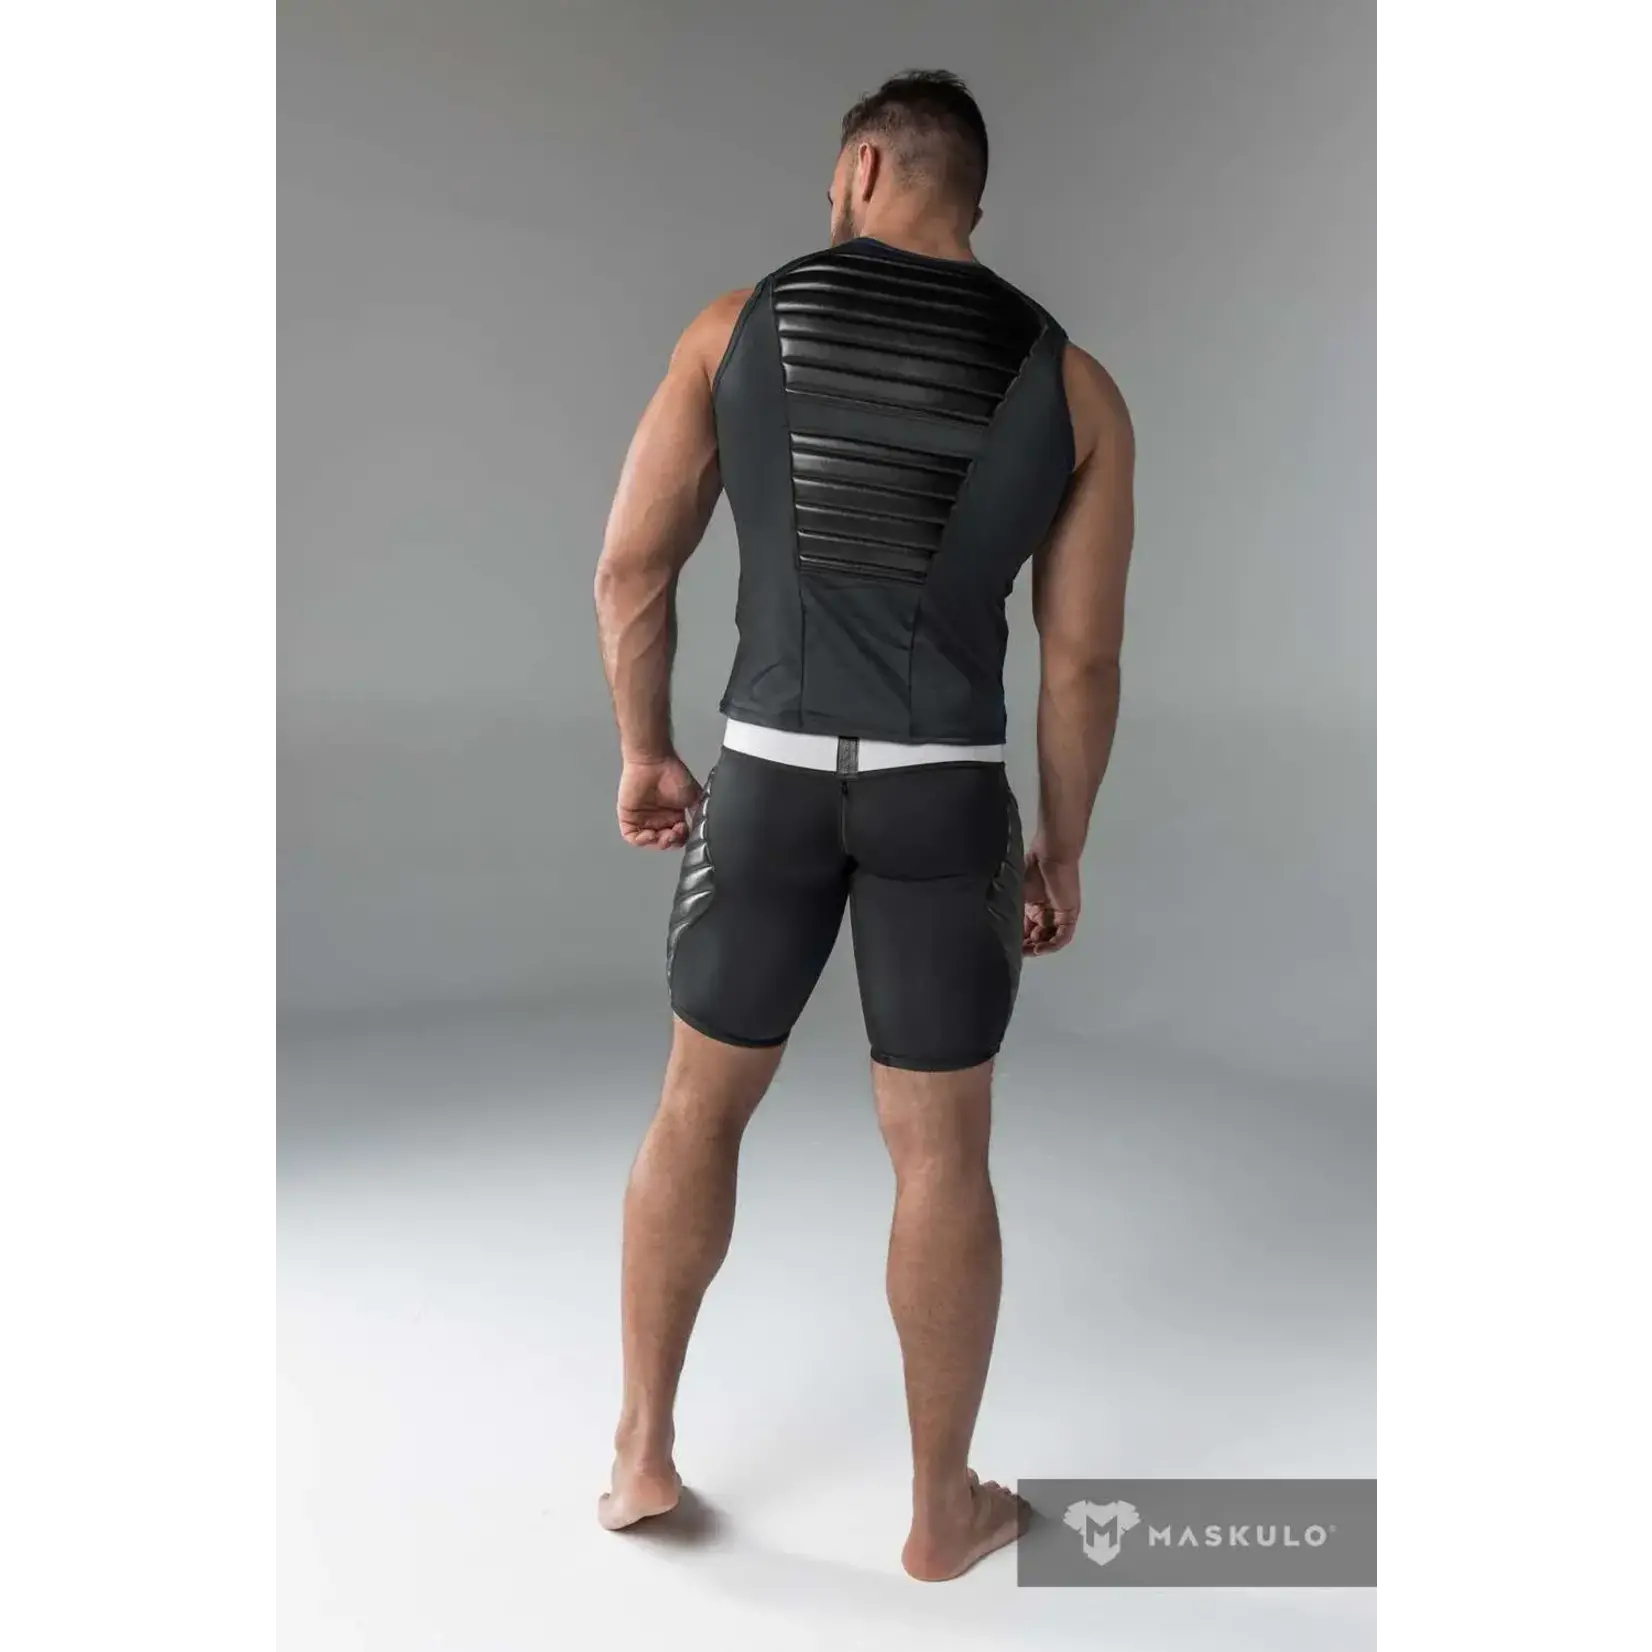 Maskulo/Outtox Maskulo Armored Tank Top - Front Pads